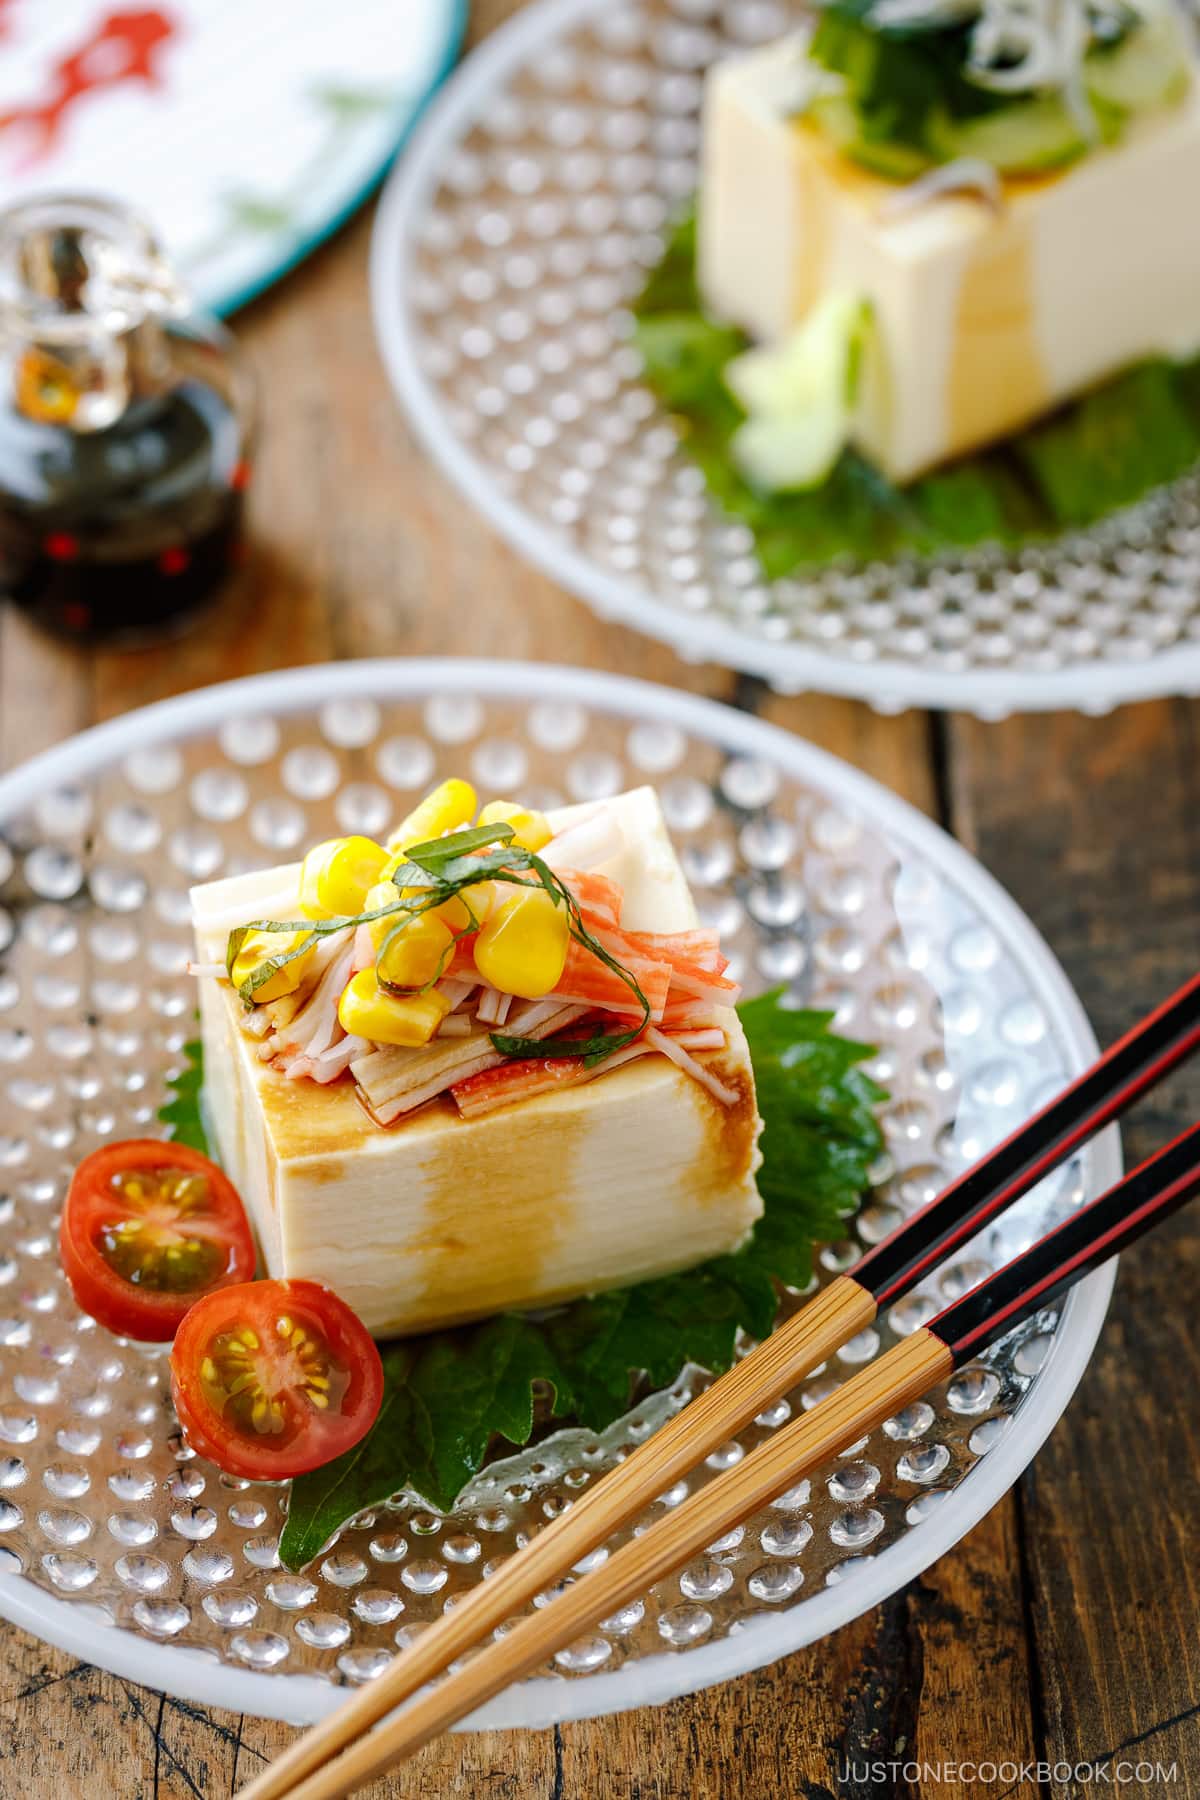 A glassware containing Japanese cold tofu topped with crabmeat, corn, and julienned shiso and drizzled with soy sauce.